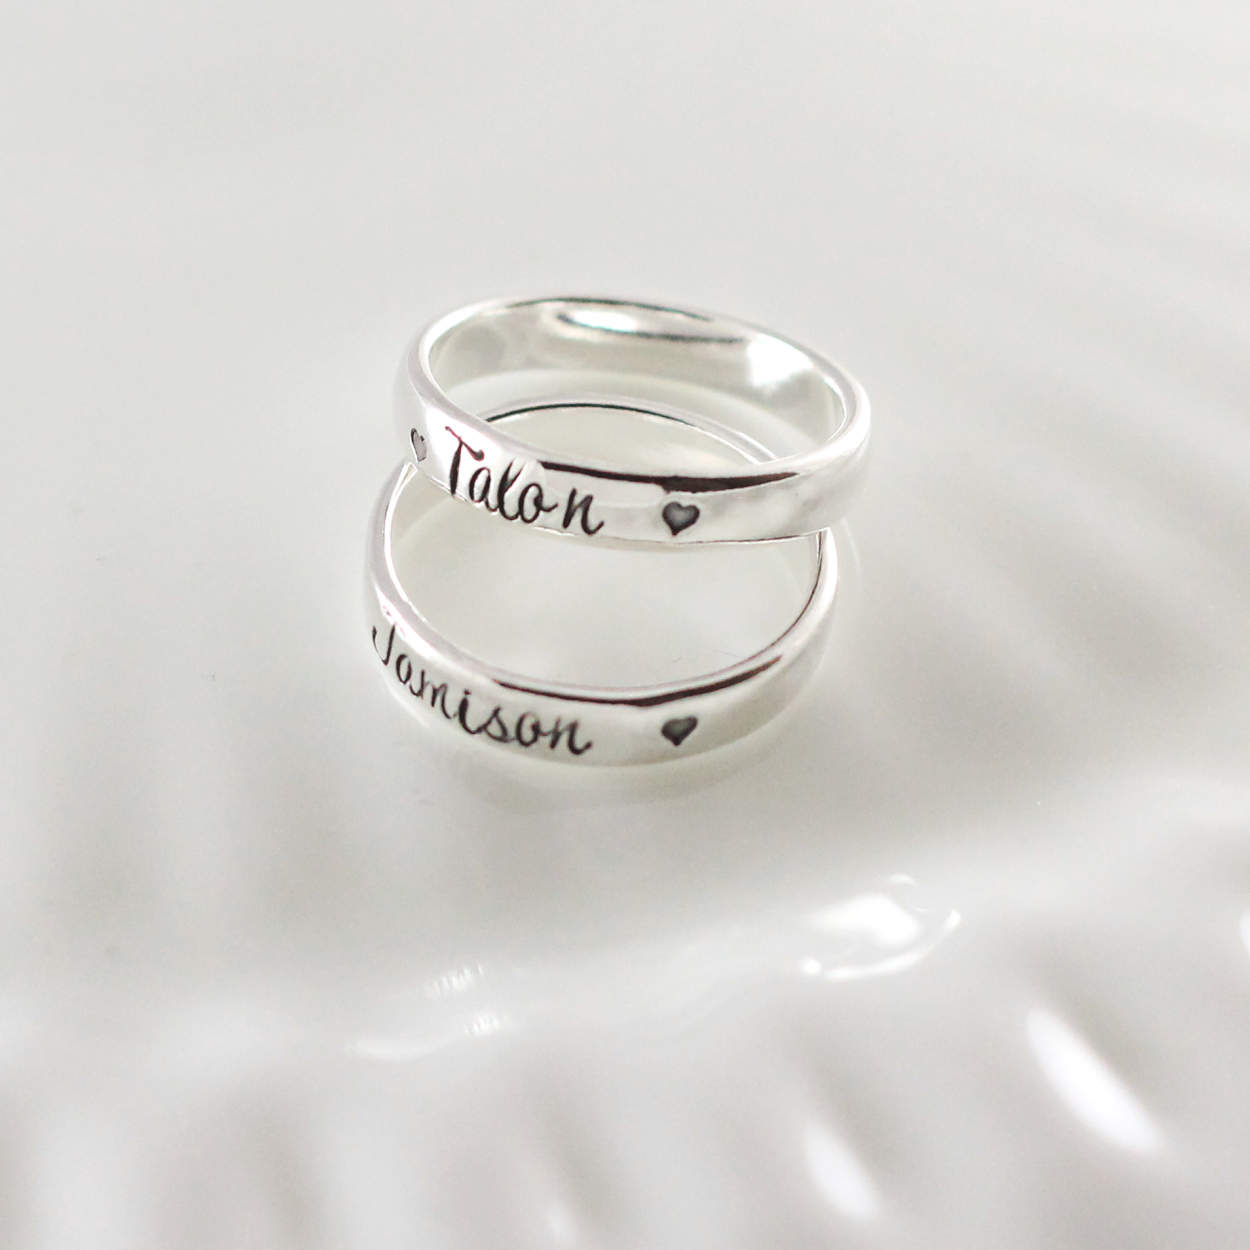 Buy Mothers Day Gift, Gift for Mommy, Silver Name Ring, Sterling Silver Ring,  Rings for Women, Engraved Ring, Stackable Rings, Gold Filled Ring Online in  India - Etsy